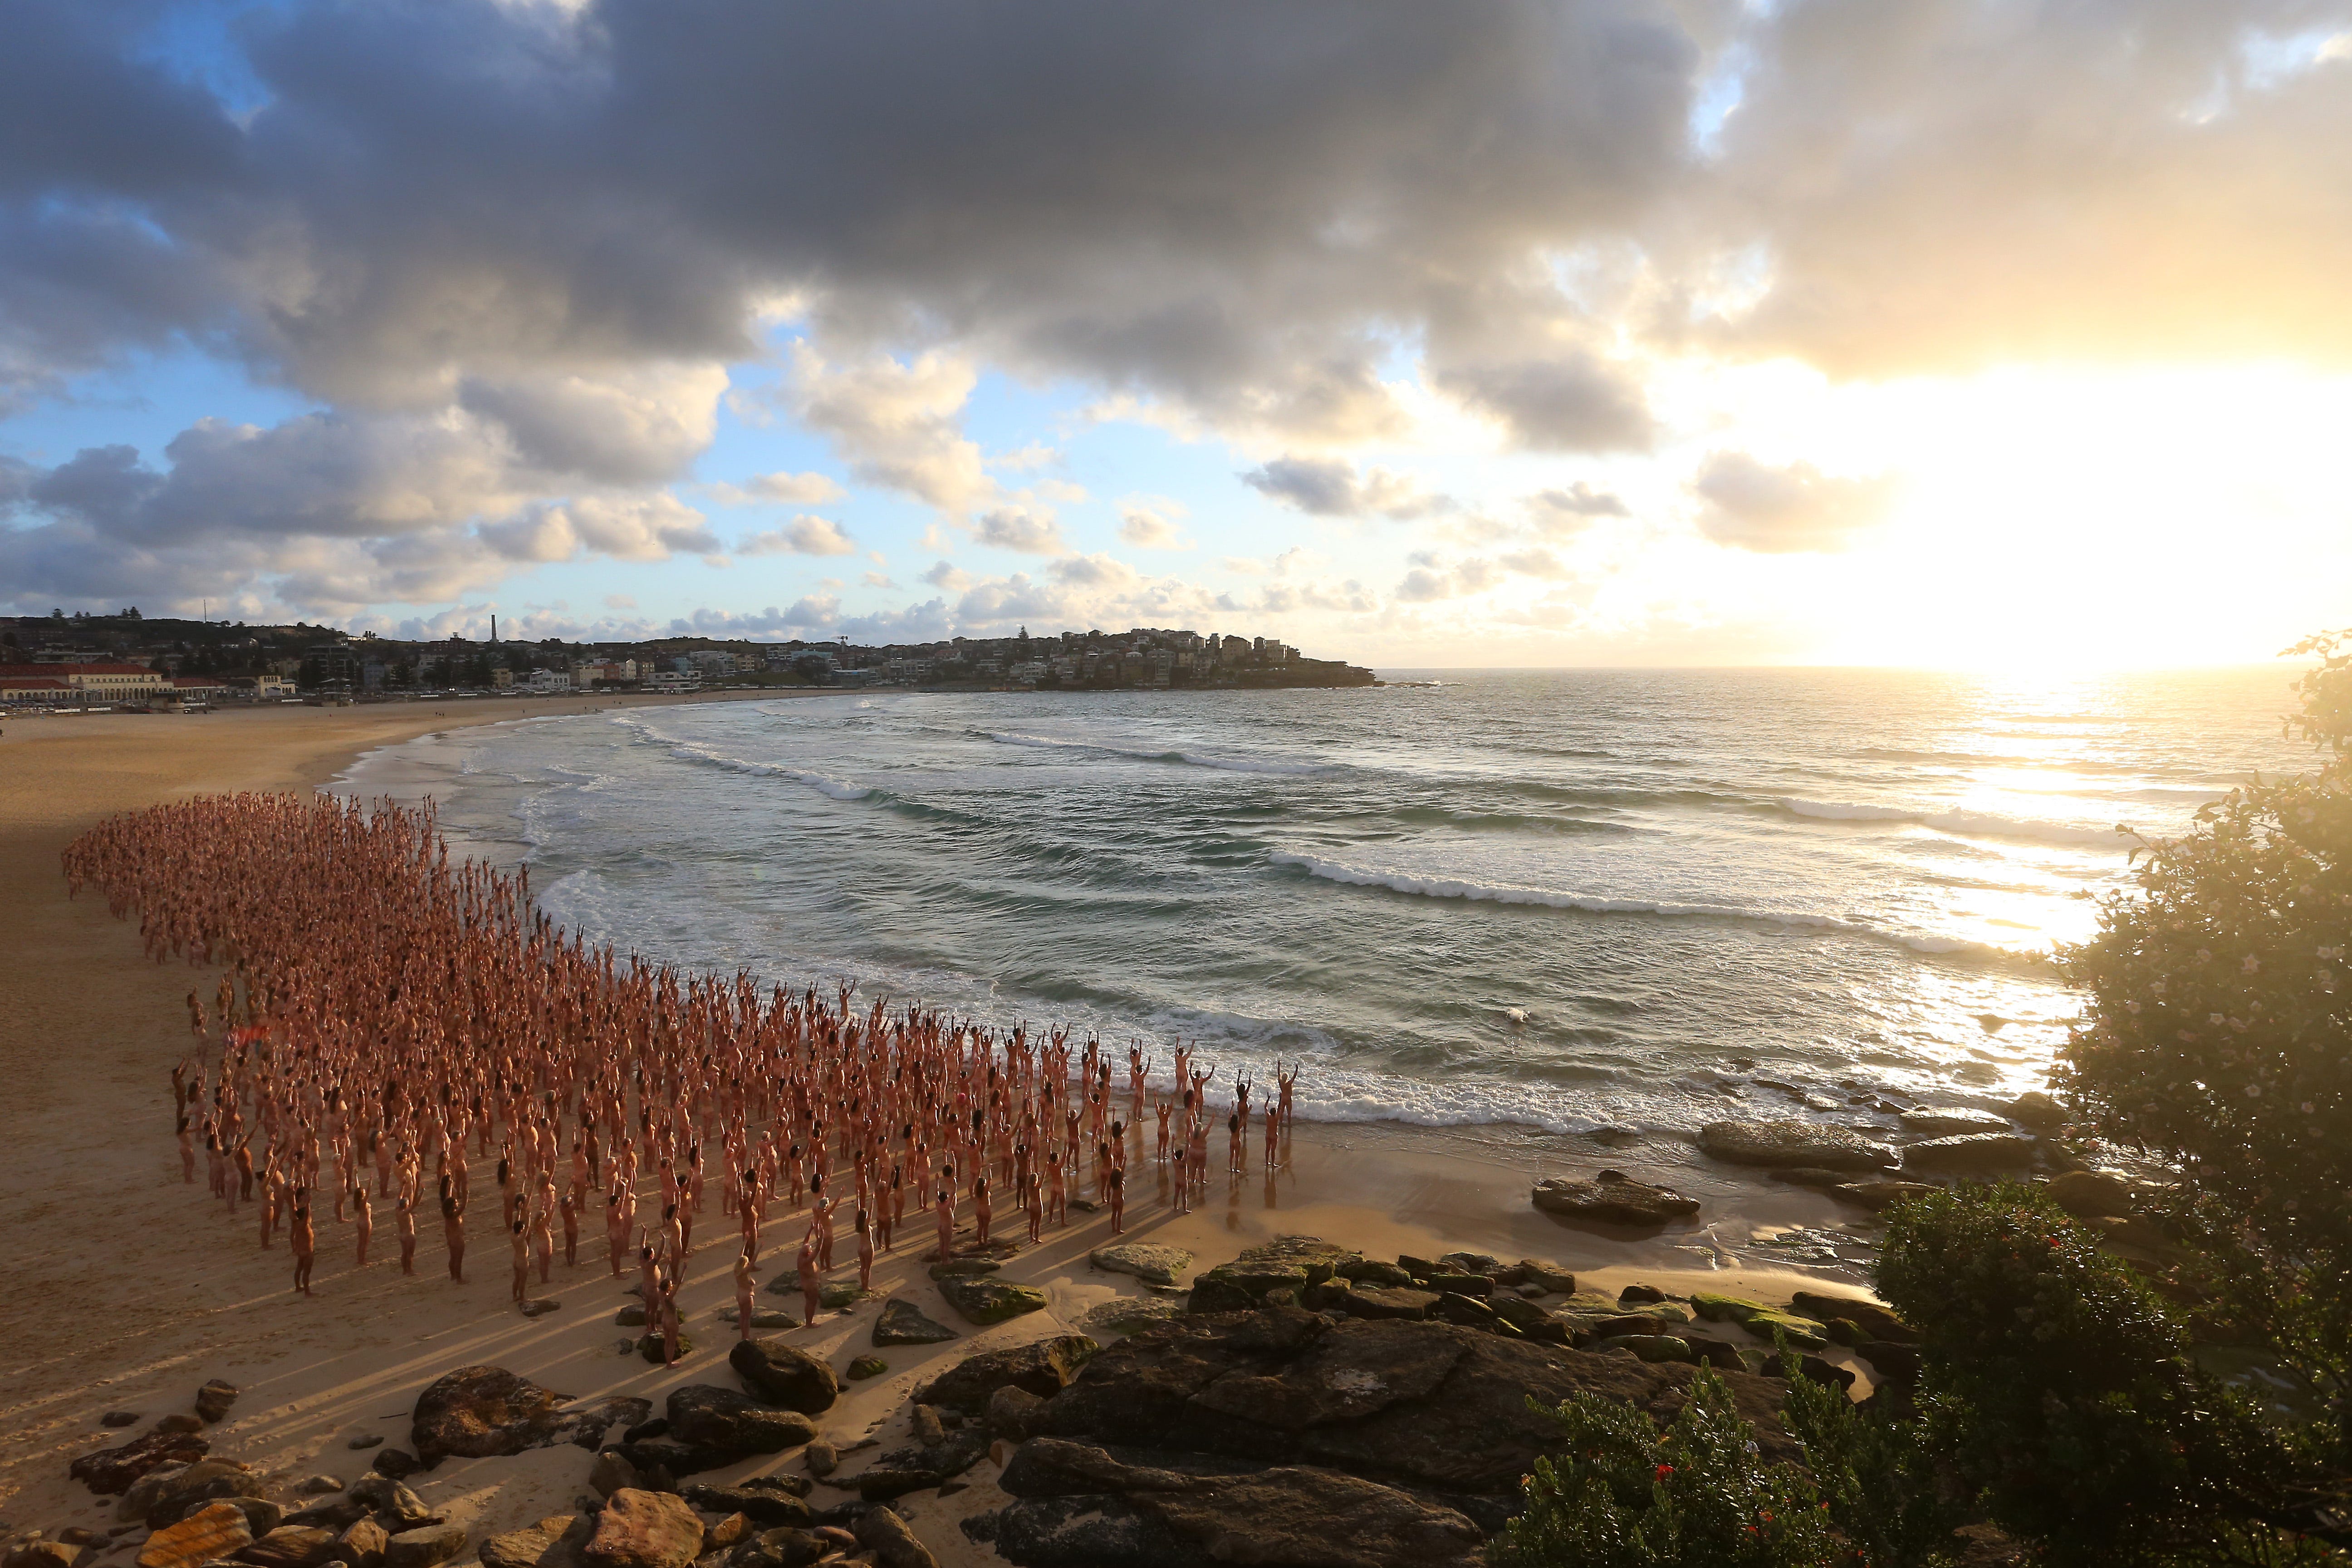 Amazing Beach Nudes - Thousands pose nude at Australian beach in Spencer Tunick photo shoot